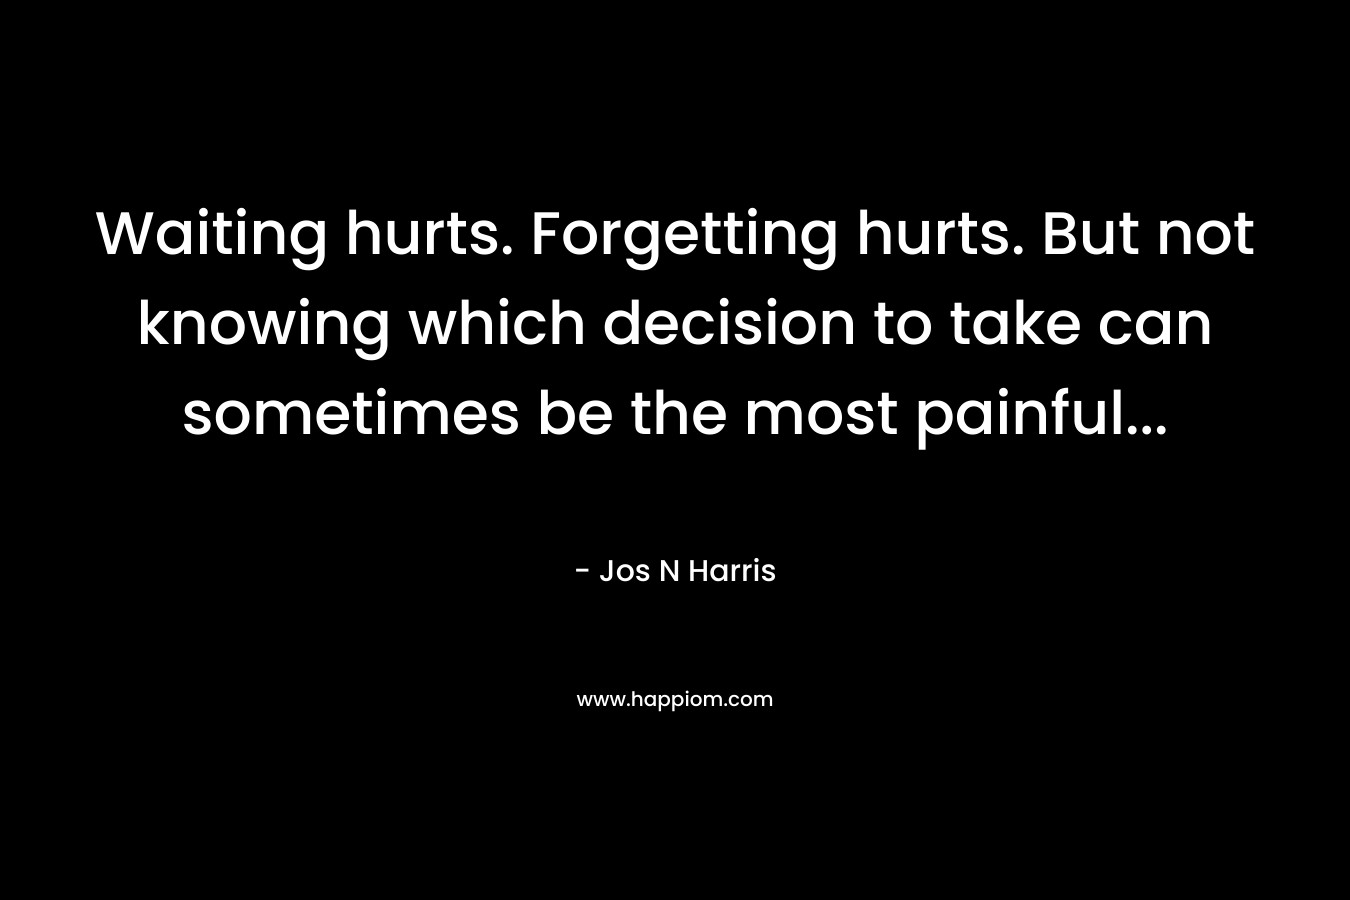 Waiting hurts. Forgetting hurts. But not knowing which decision to take can sometimes be the most painful...